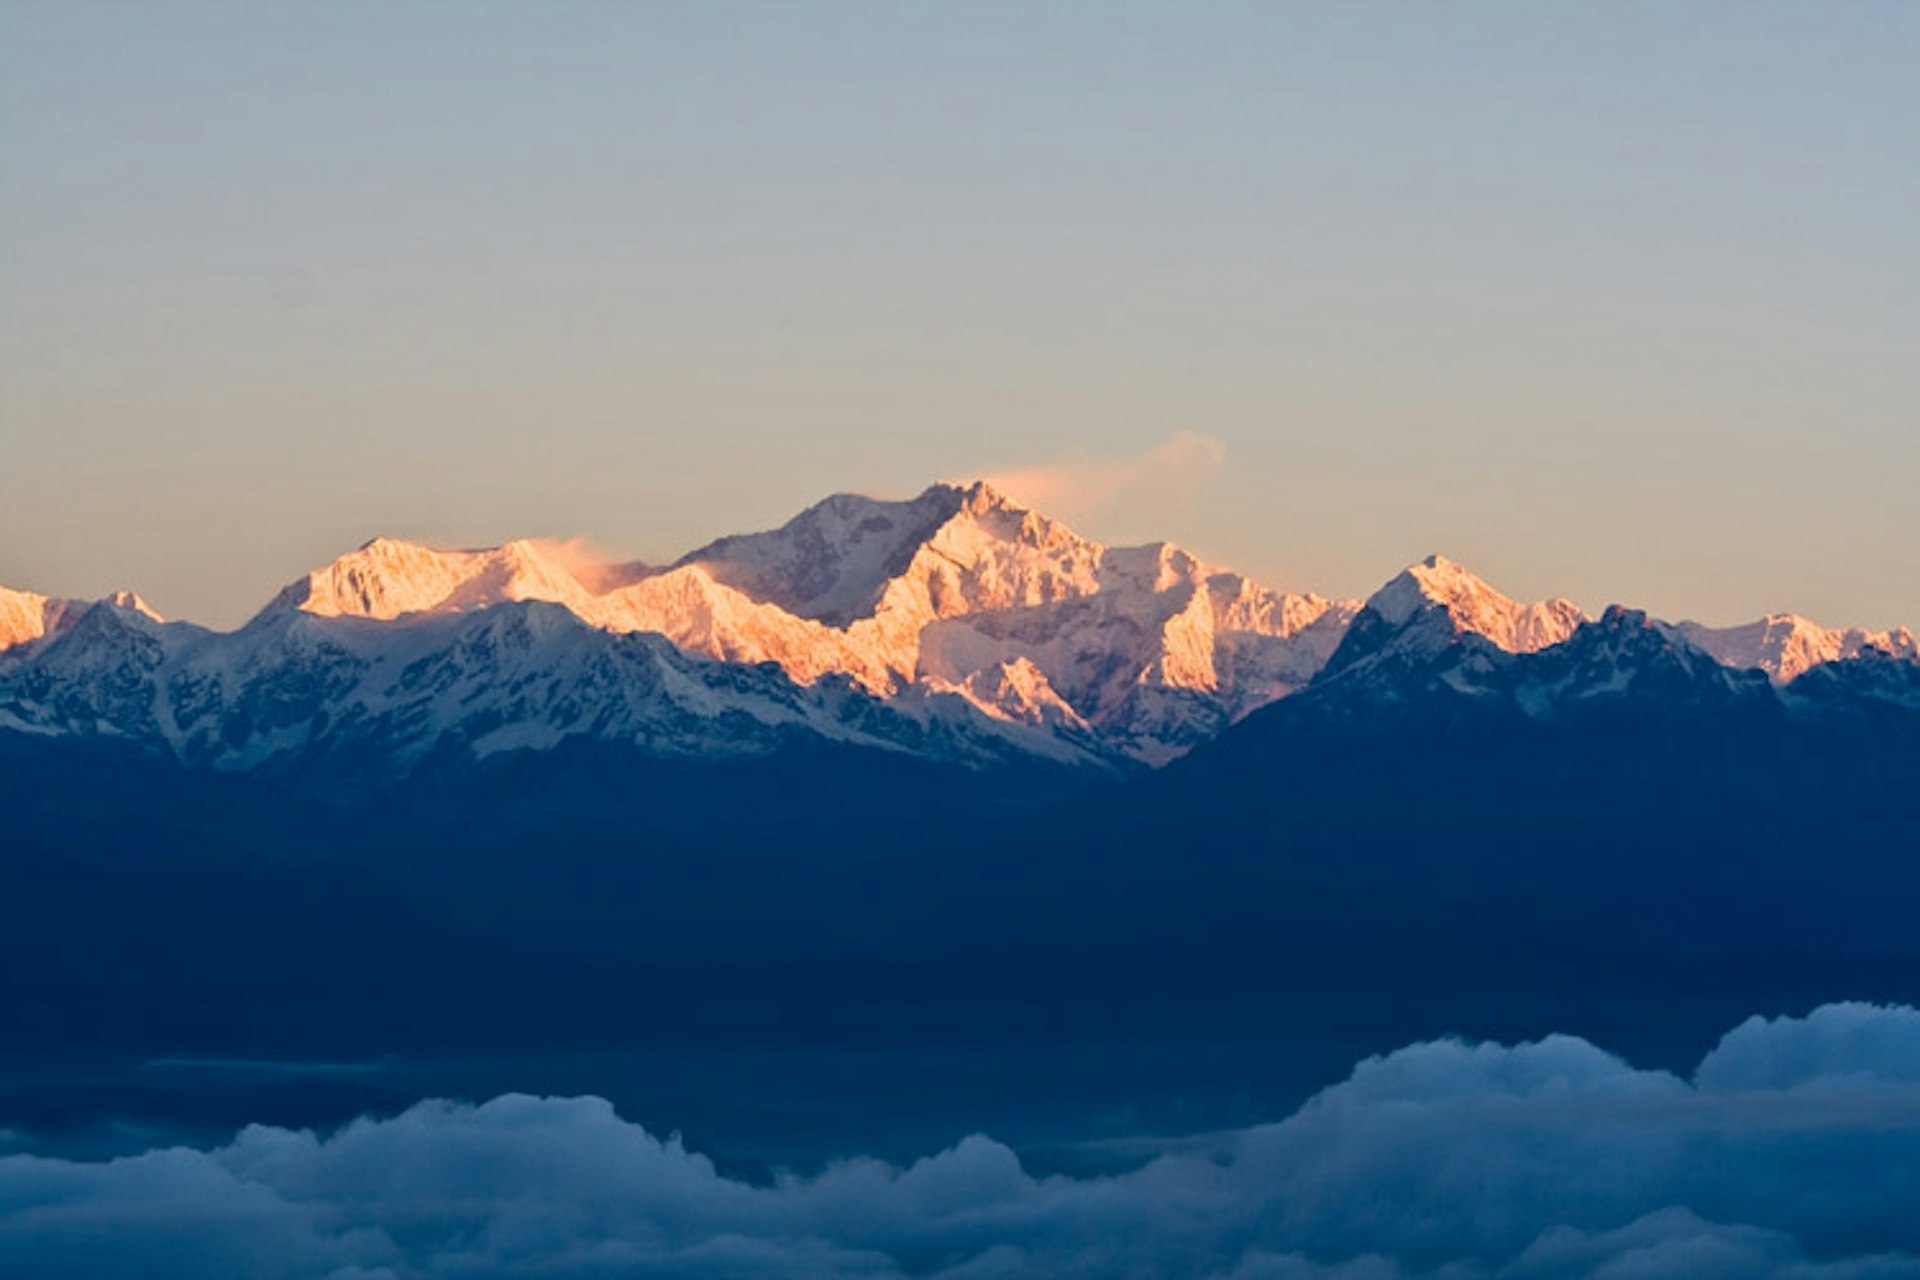 <span class="caption">Sunrise over Khangchendzonga, India. Image by A.Ostrovsky / CC BY-SA.</scan> 